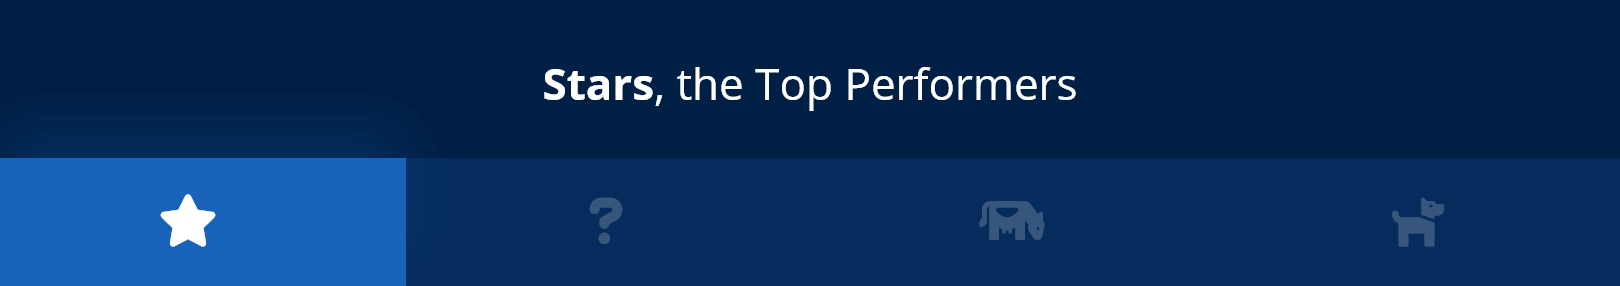 Stars, the Top Performers